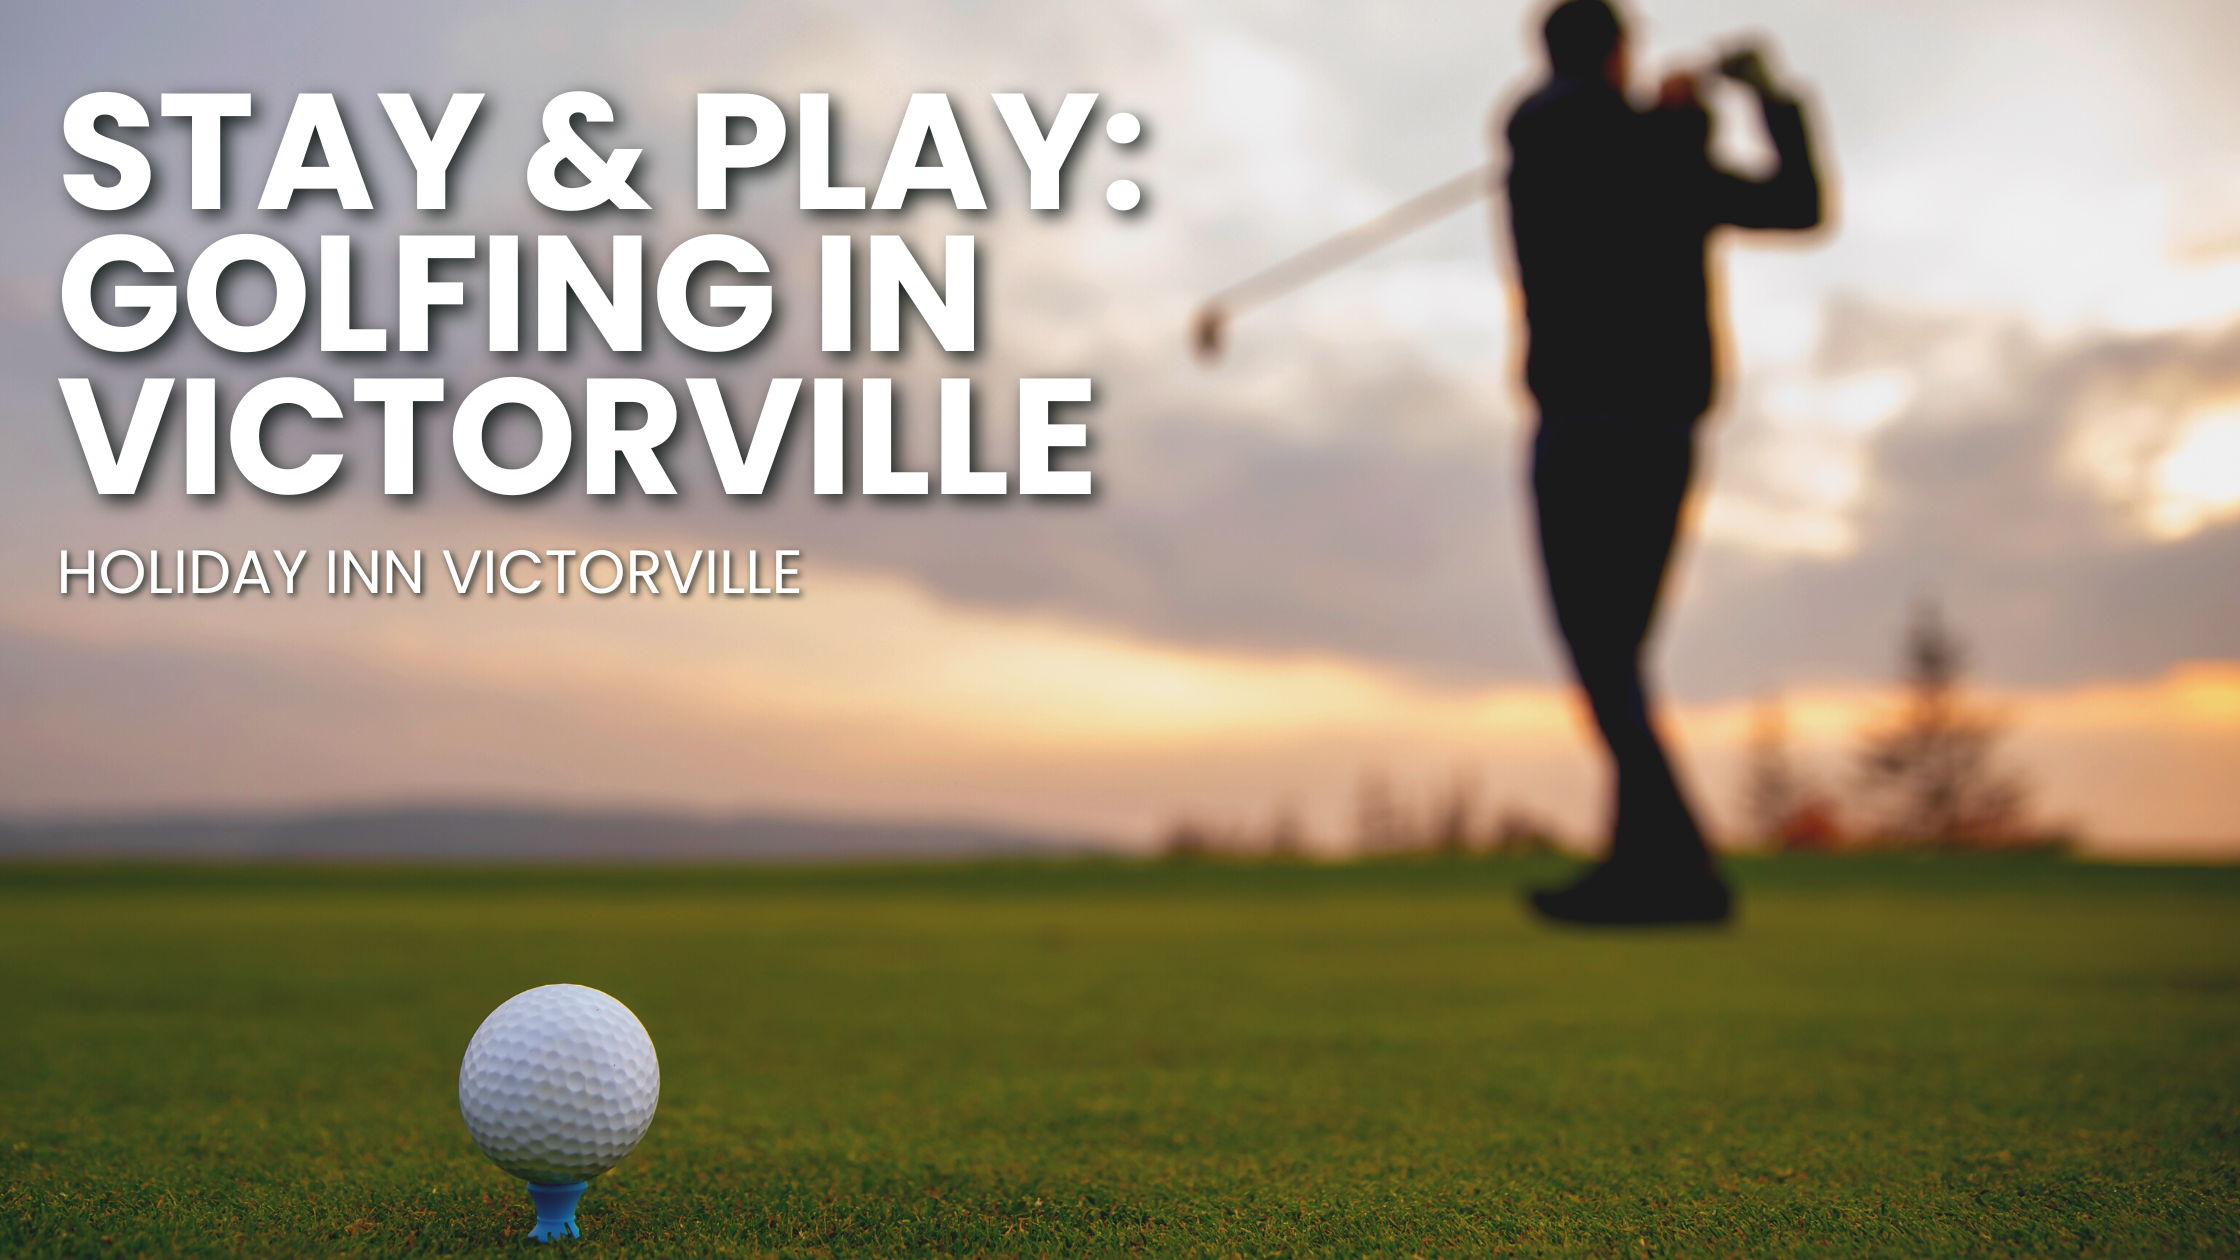 Stay and Play: Golfing in Victorville